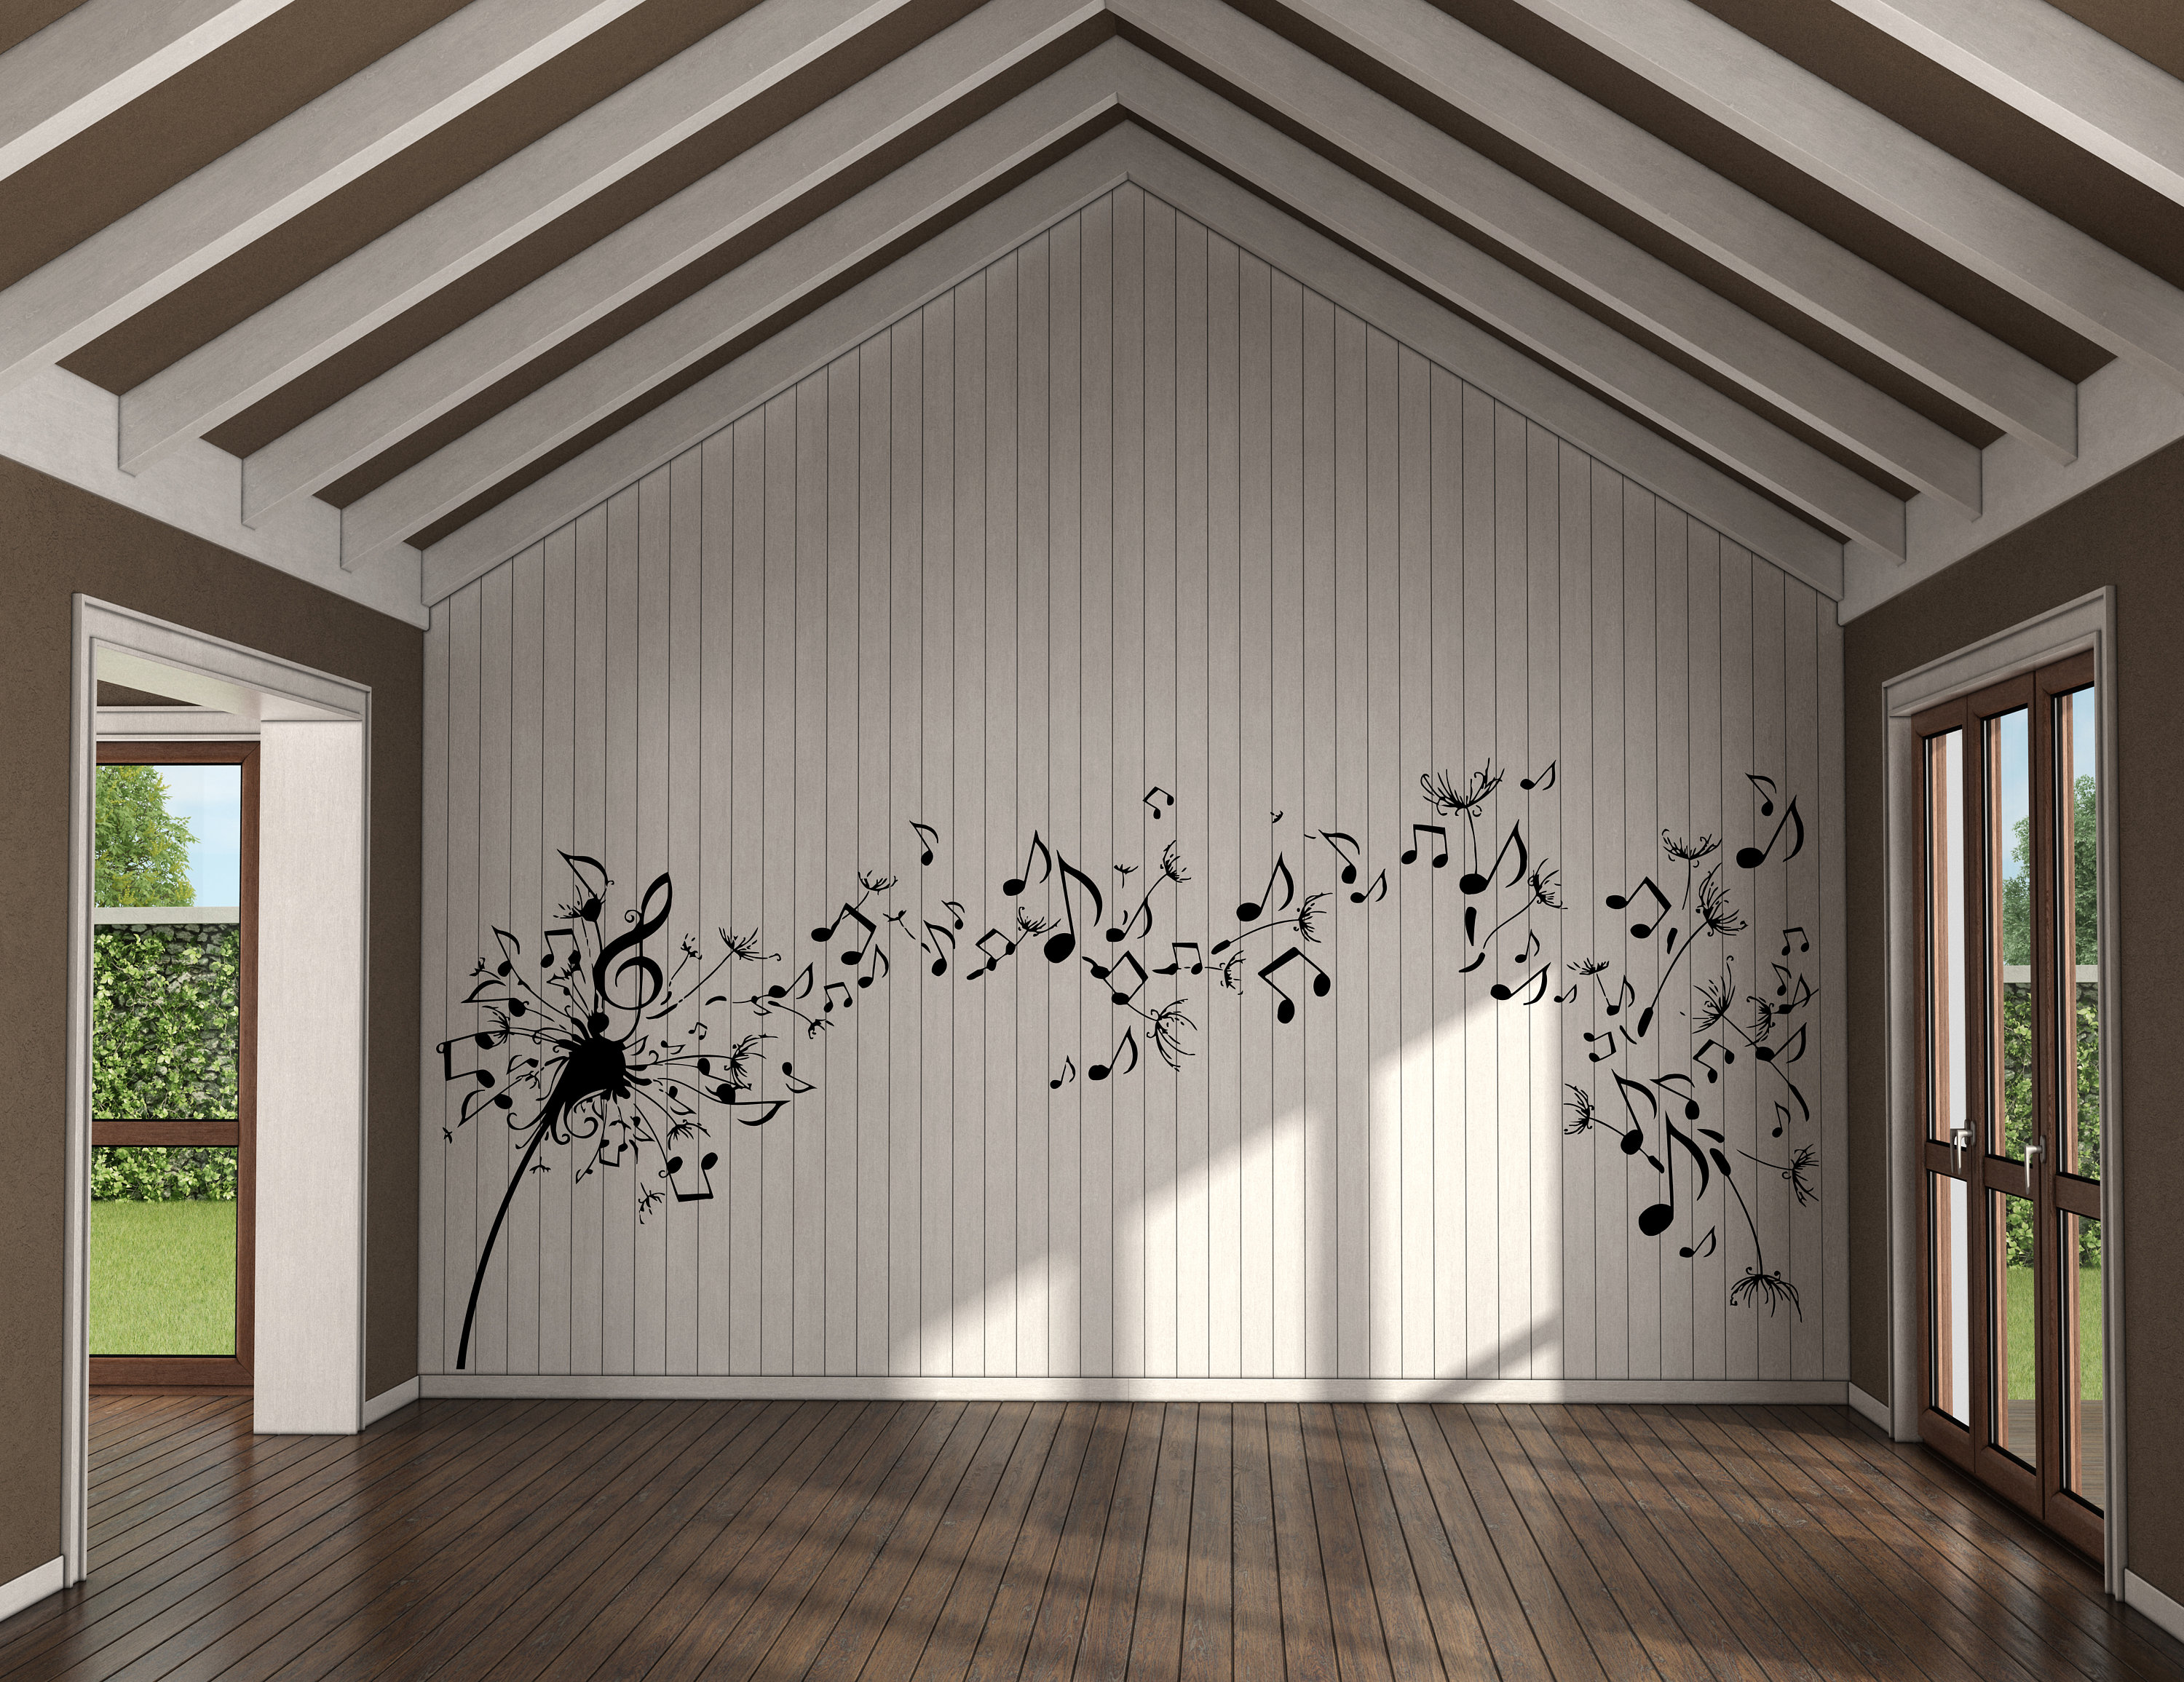 Headphone Music Wall Decal Sticker for Dorm Room Musical Notes Wall Mu –  American Wall Designs